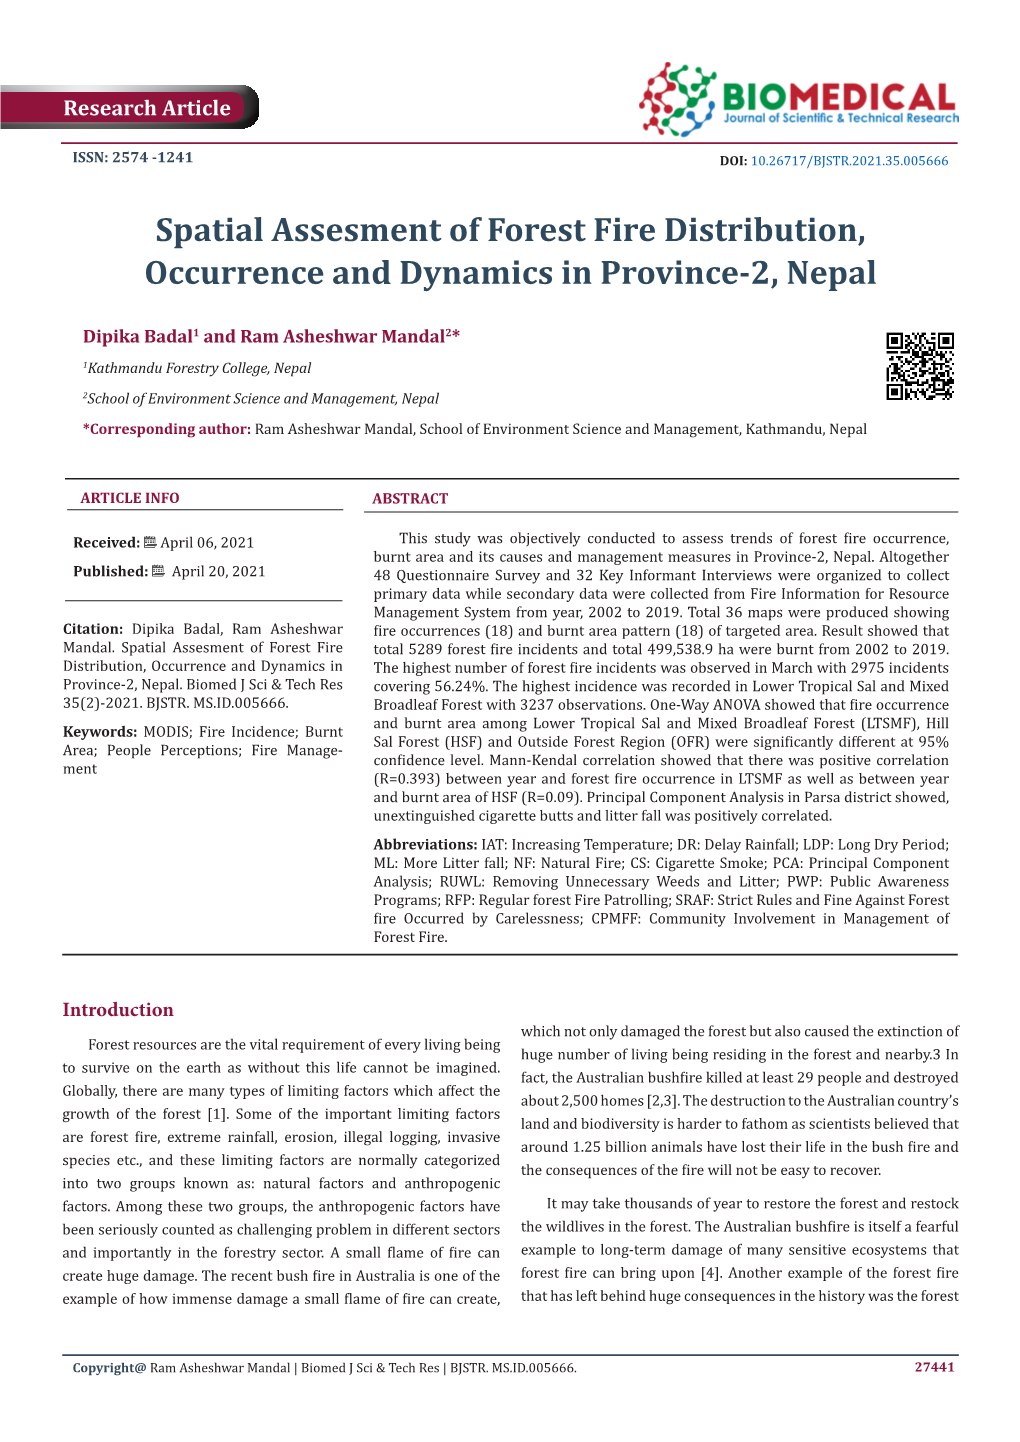 Spatial Assesment of Forest Fire Distribution, Occurrence and Dynamics in Province-2, Nepal